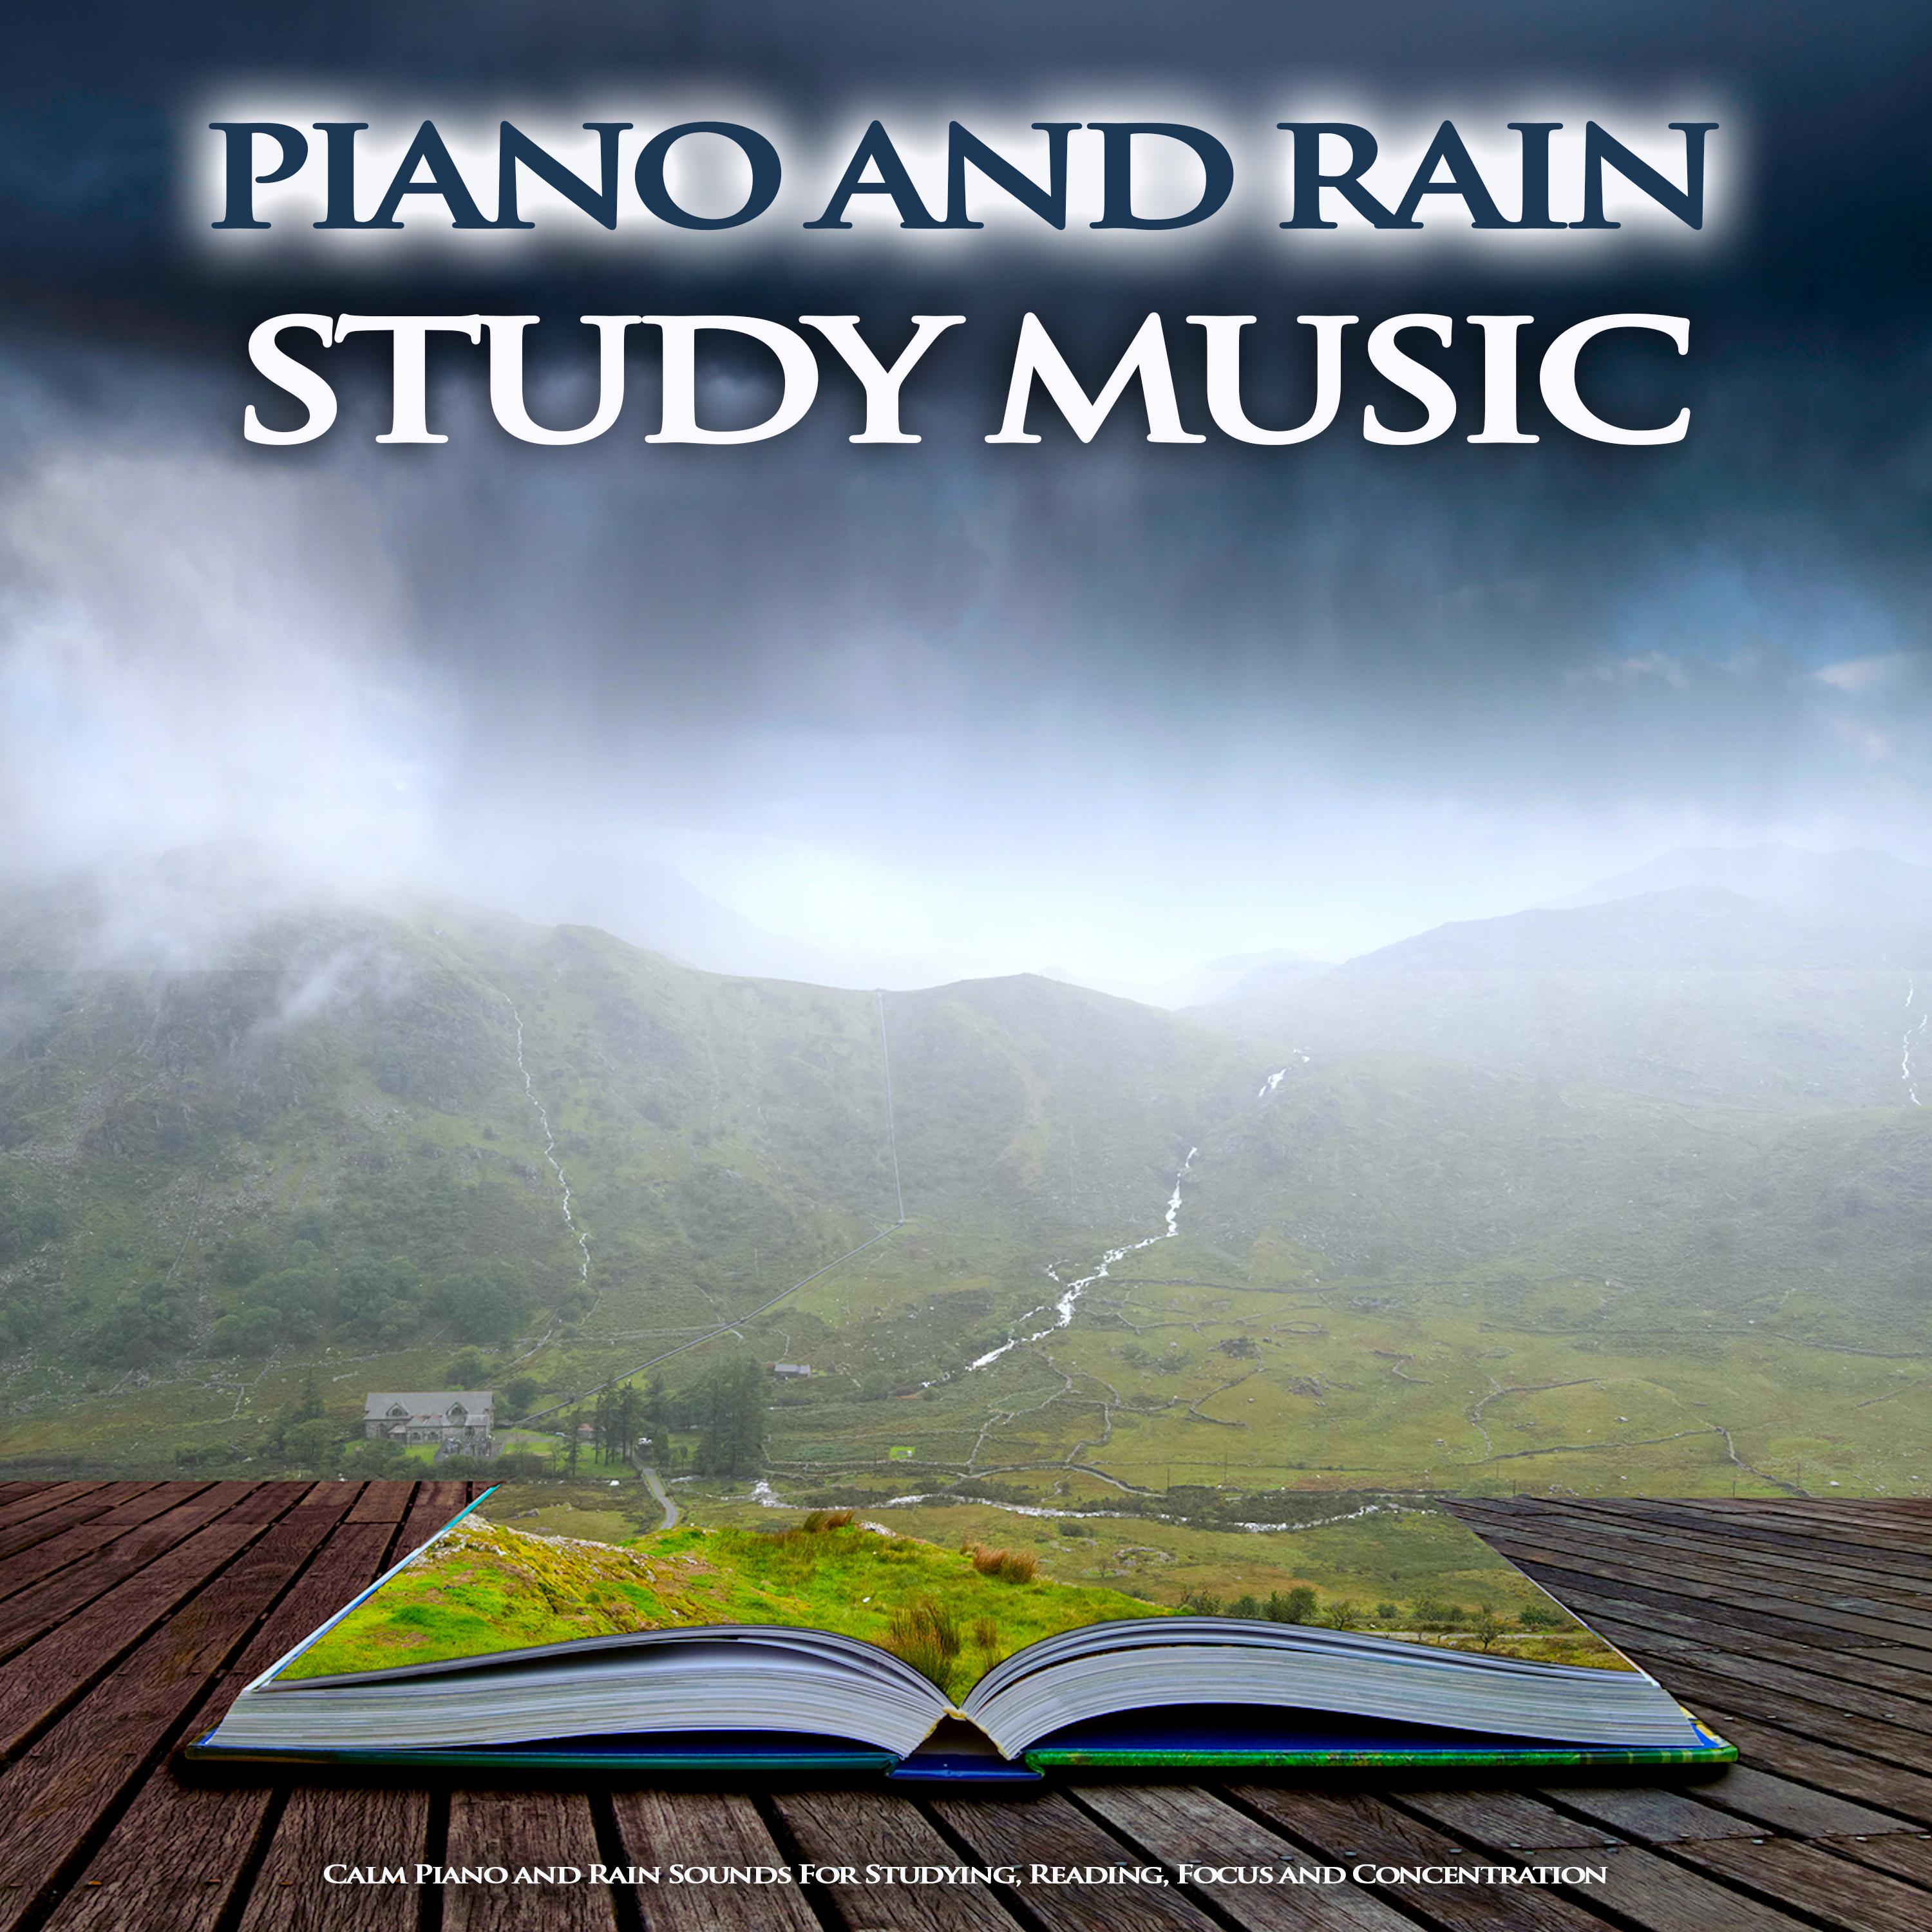 Ambient Music and Rain Sounds For Study